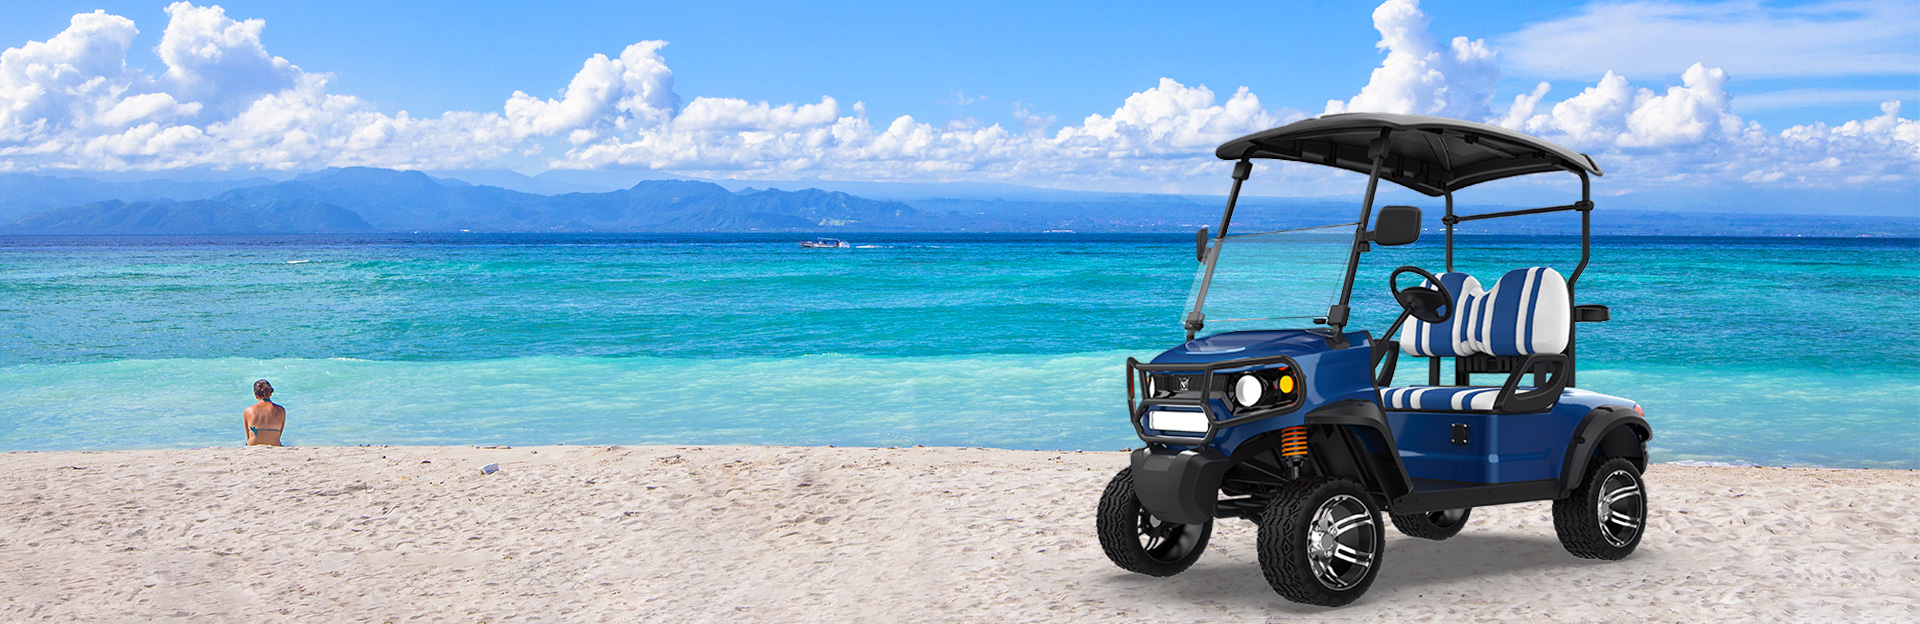 Discover Peak Performance with Our Electric Golf Carts: Redefining Golfing Excellence!